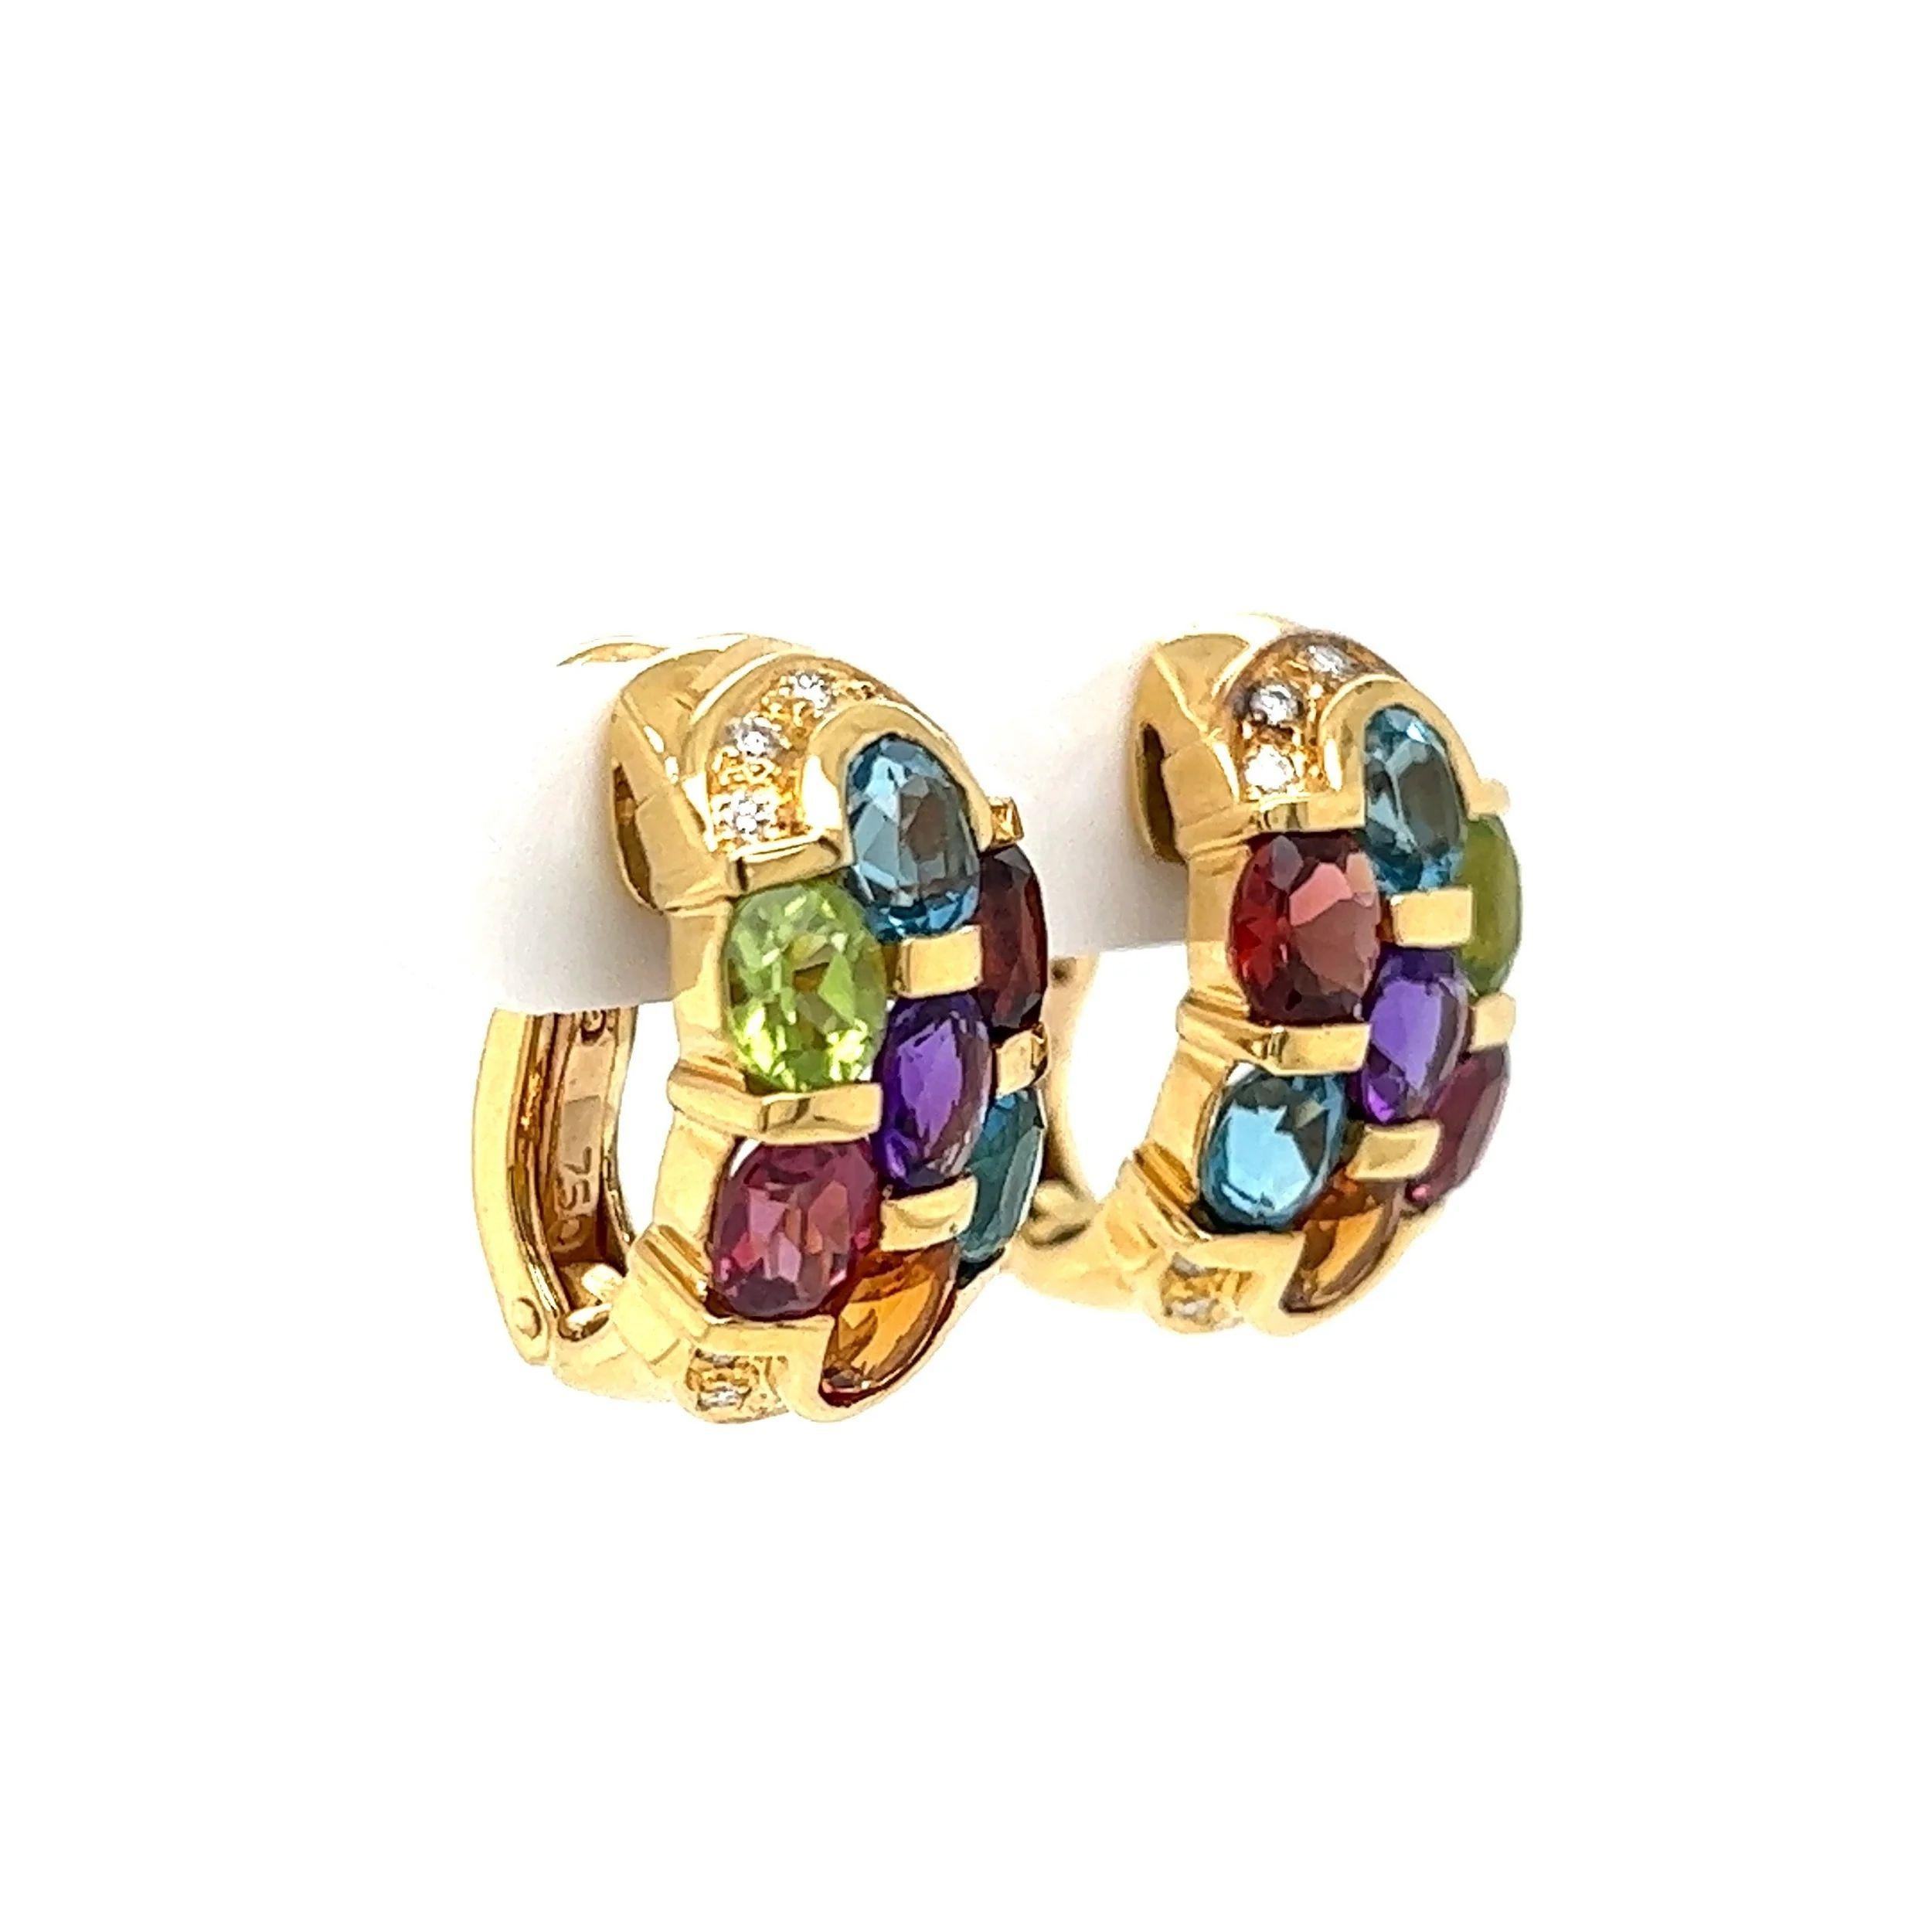 Simply Beautiful! High Quality Finely detailed Multi-Gemstone Topaz, Amethyst, Garnet, Tourmaline, Citrine and Peridot. Weighing approx. 4.50tcw. Accented by Diamonds, approx. 0.20tcw. Hand crafted in 18K Yellow Gold. Post and/or Clip system.